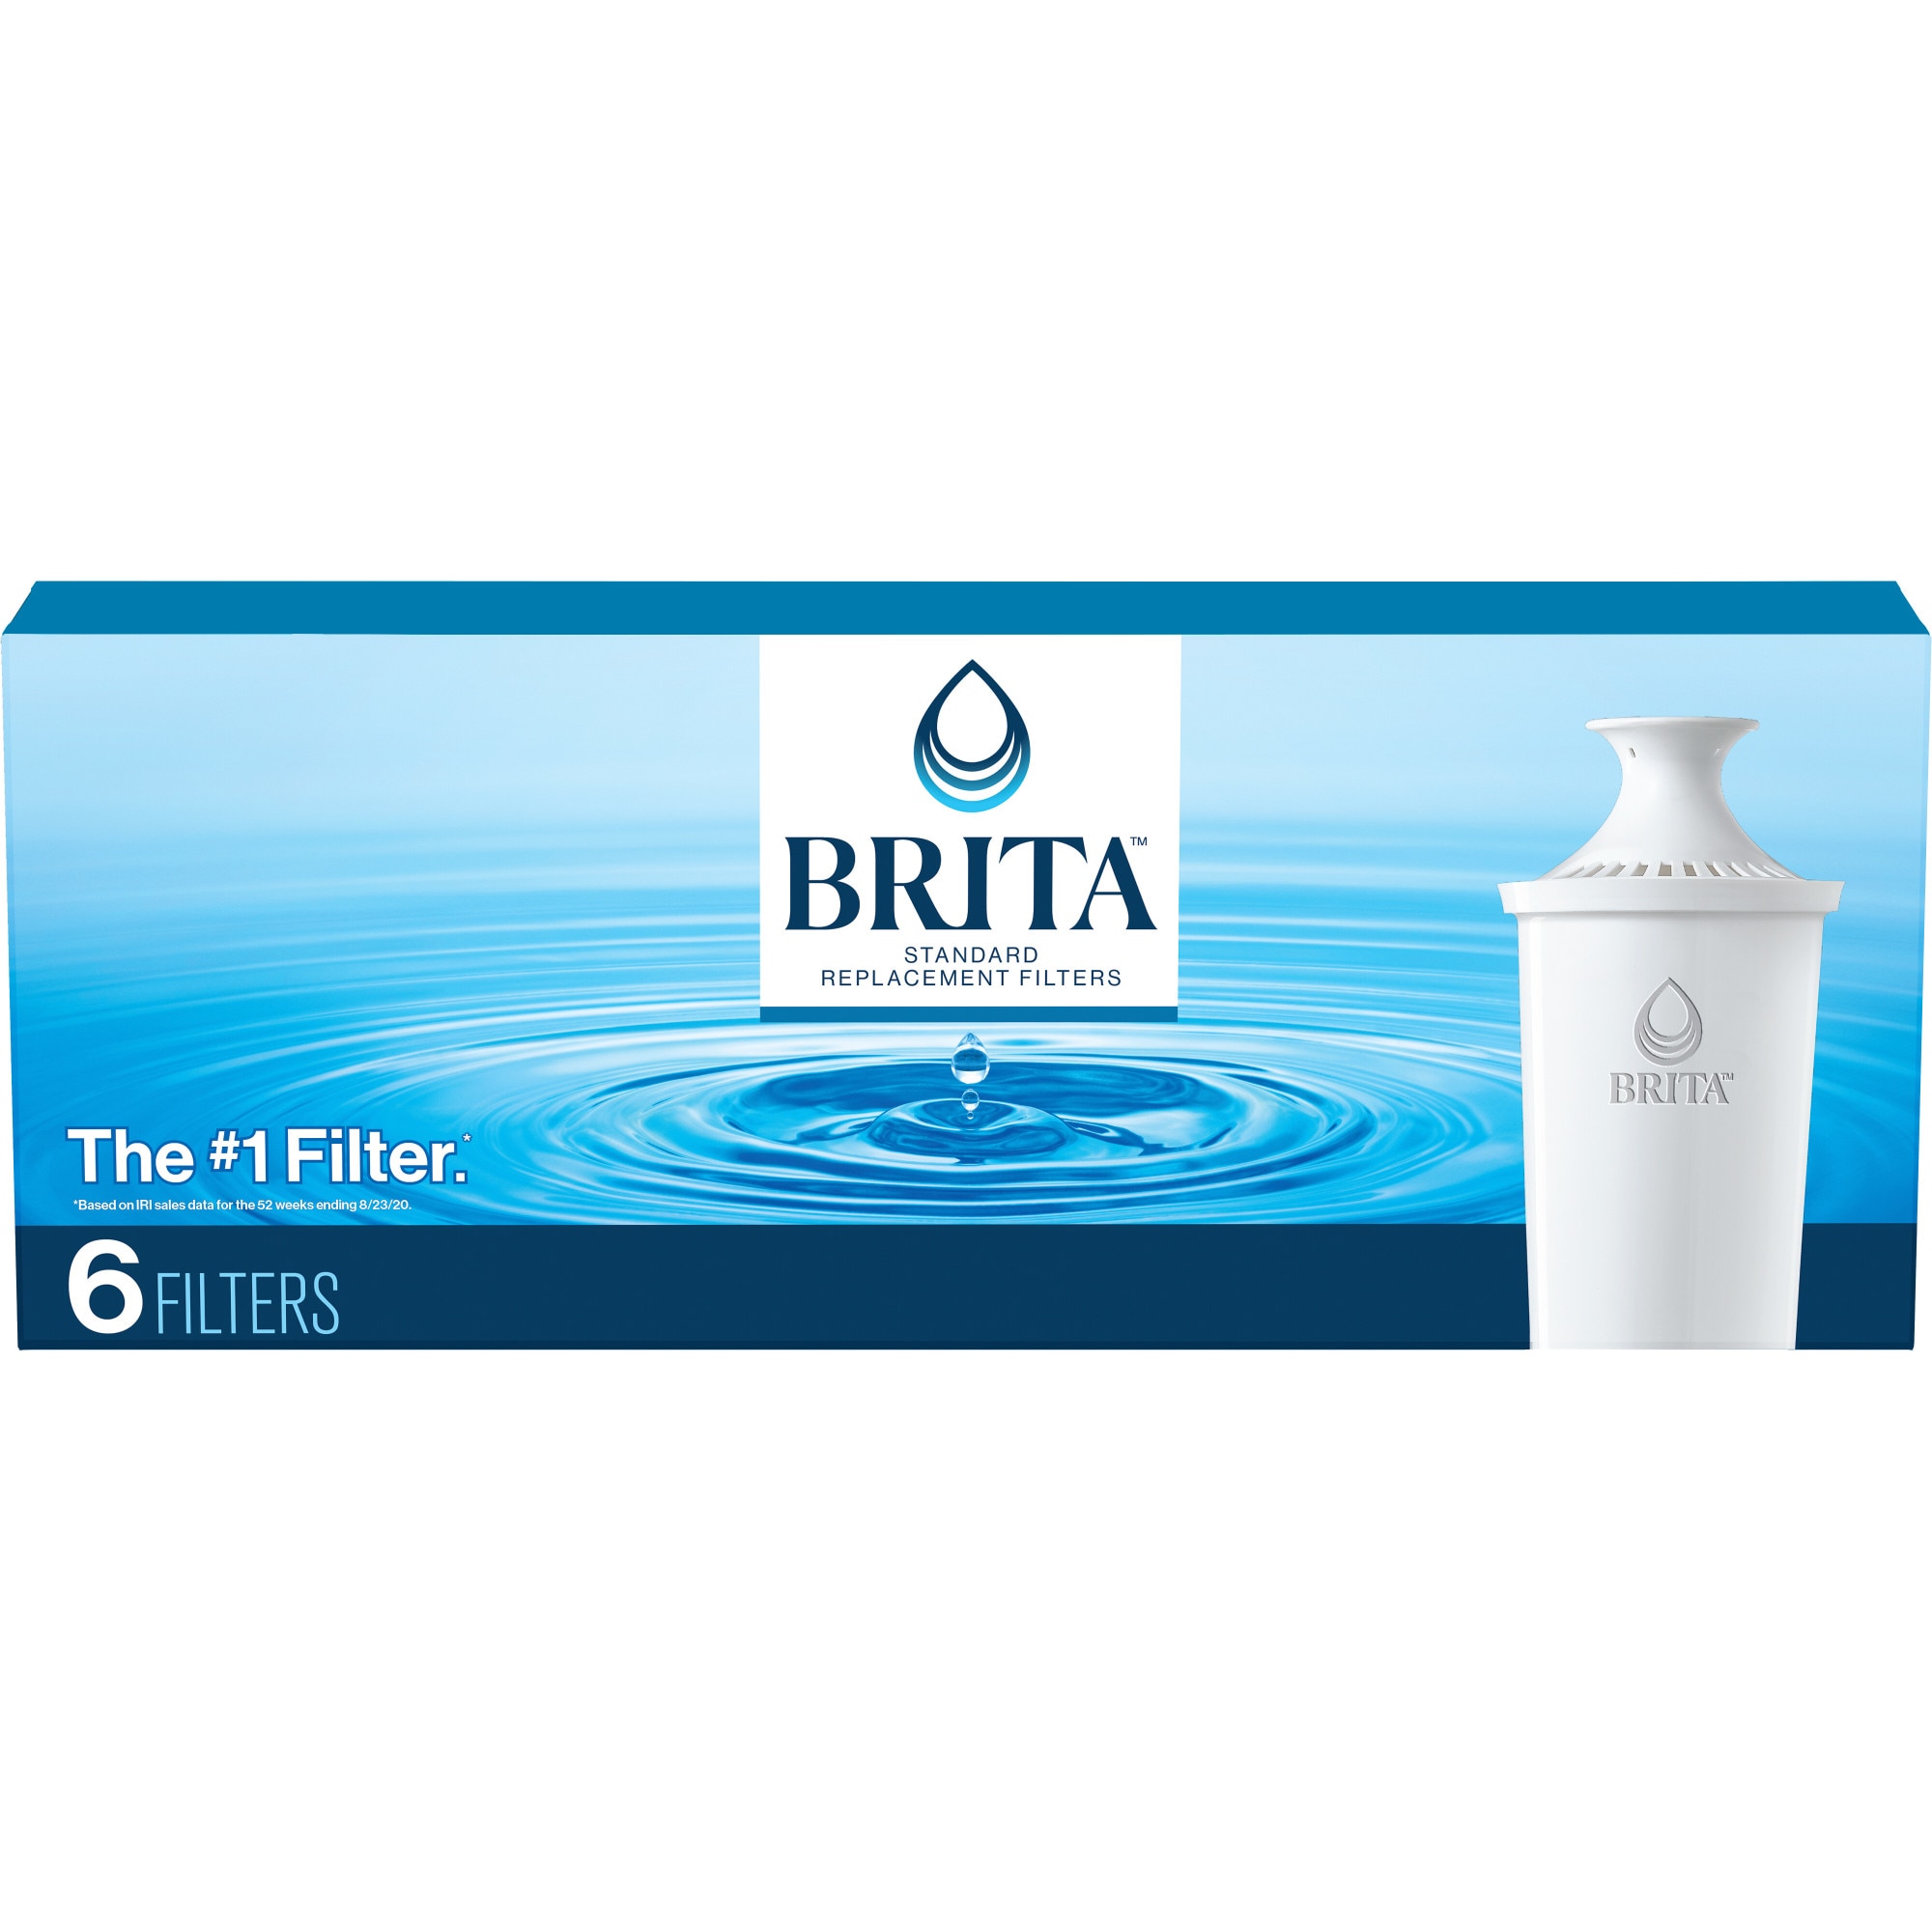  Brita Standard Water Filter Replacements for Pitchers and  Dispensers, Lasts 2 Months, Reduces Chlorine Taste and Odor, 3 Count